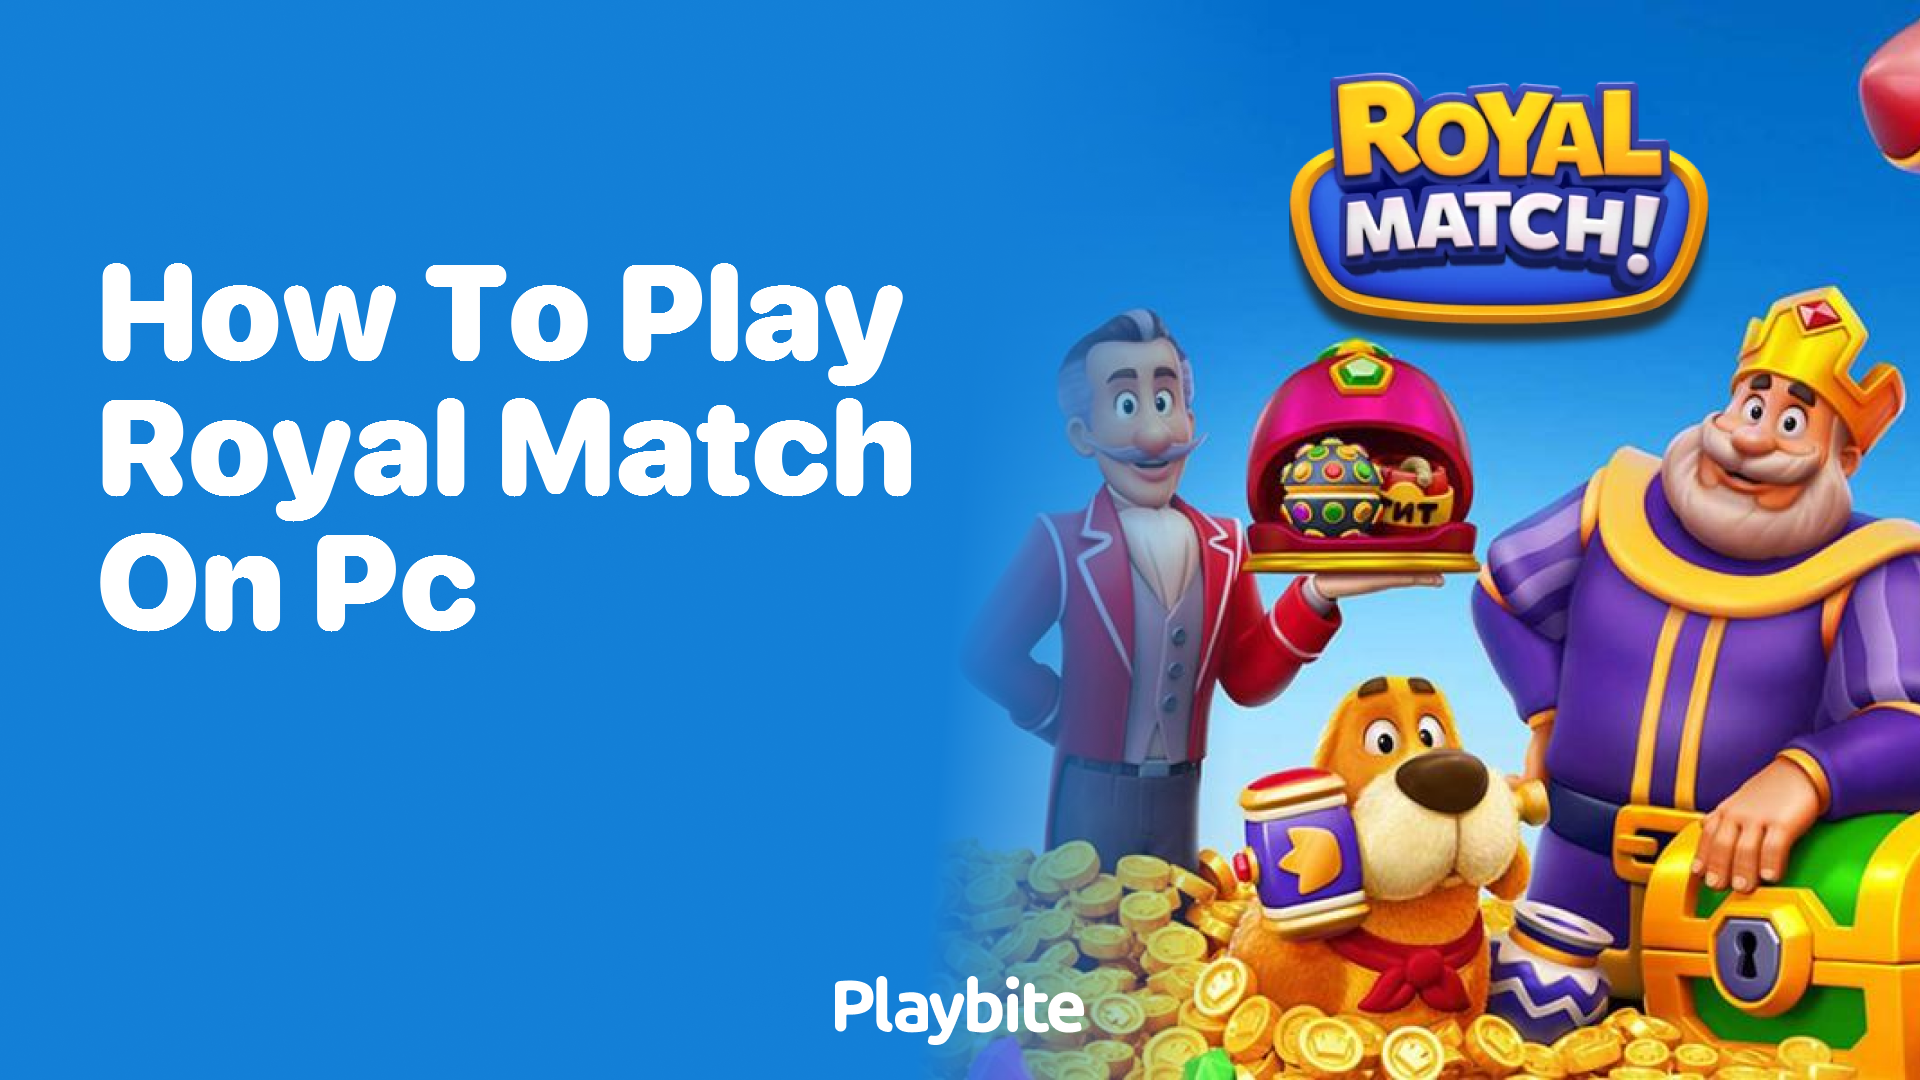 How to Play Royal Match on PC